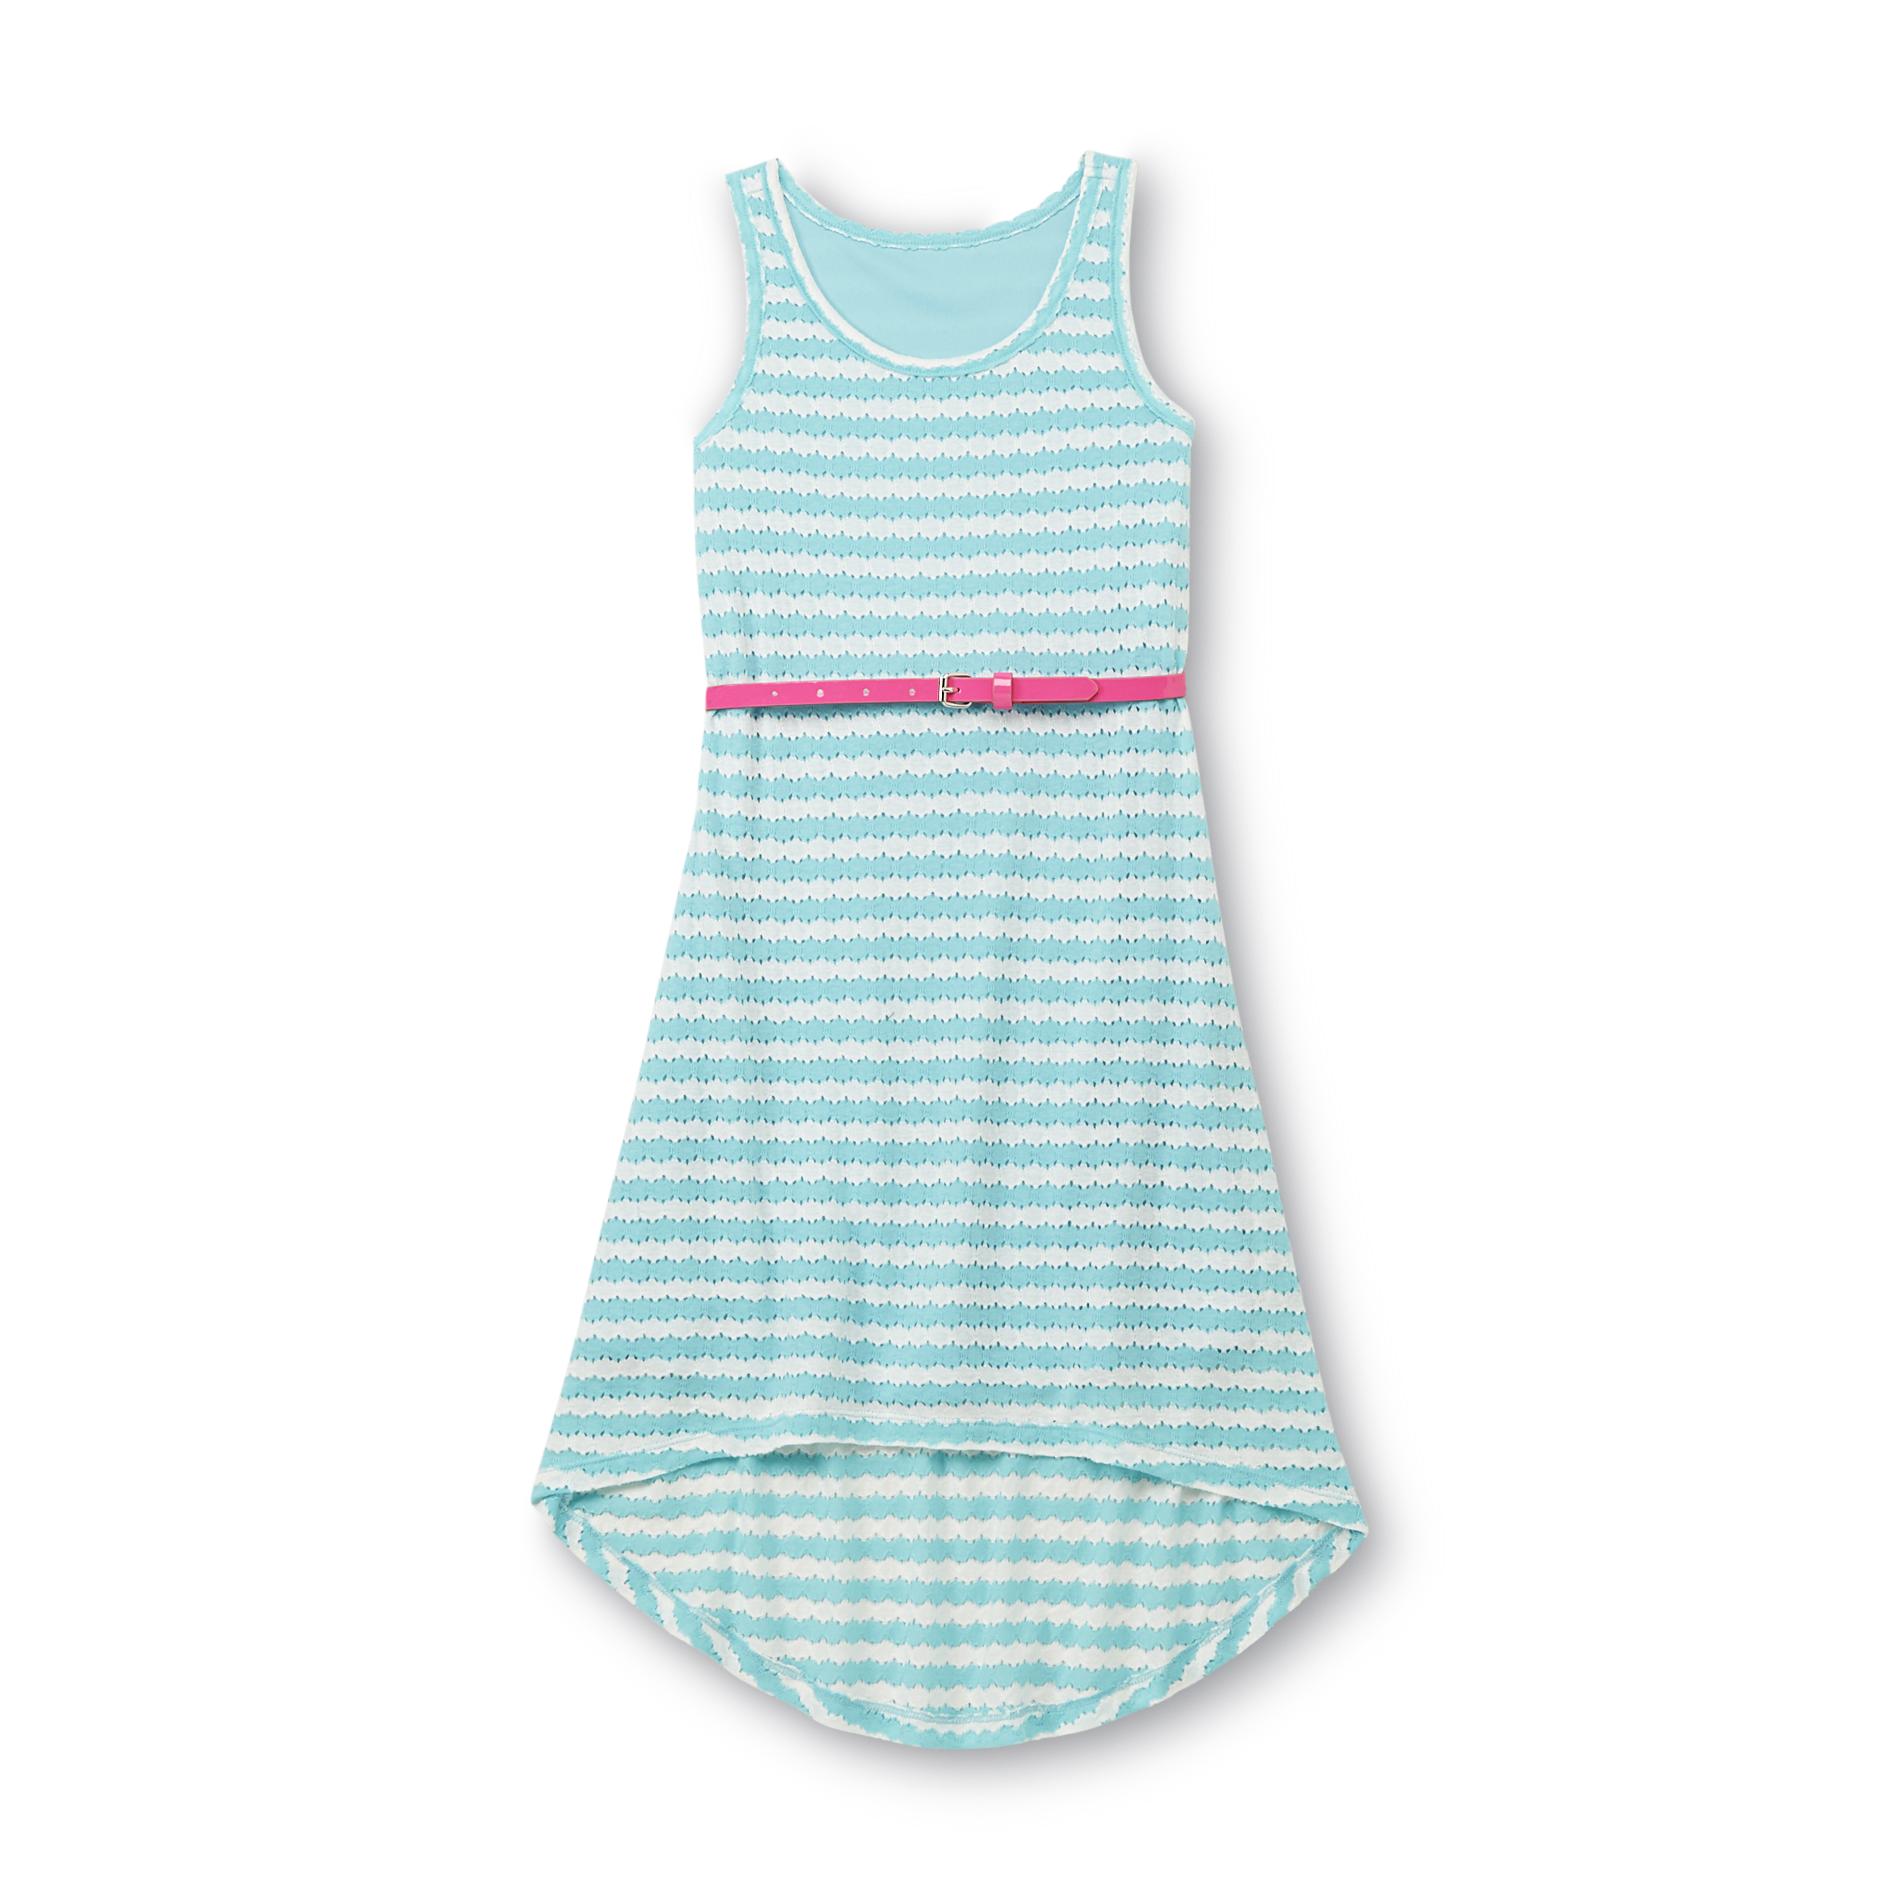 Piper Girl's Belted High-Low Sundress - Striped